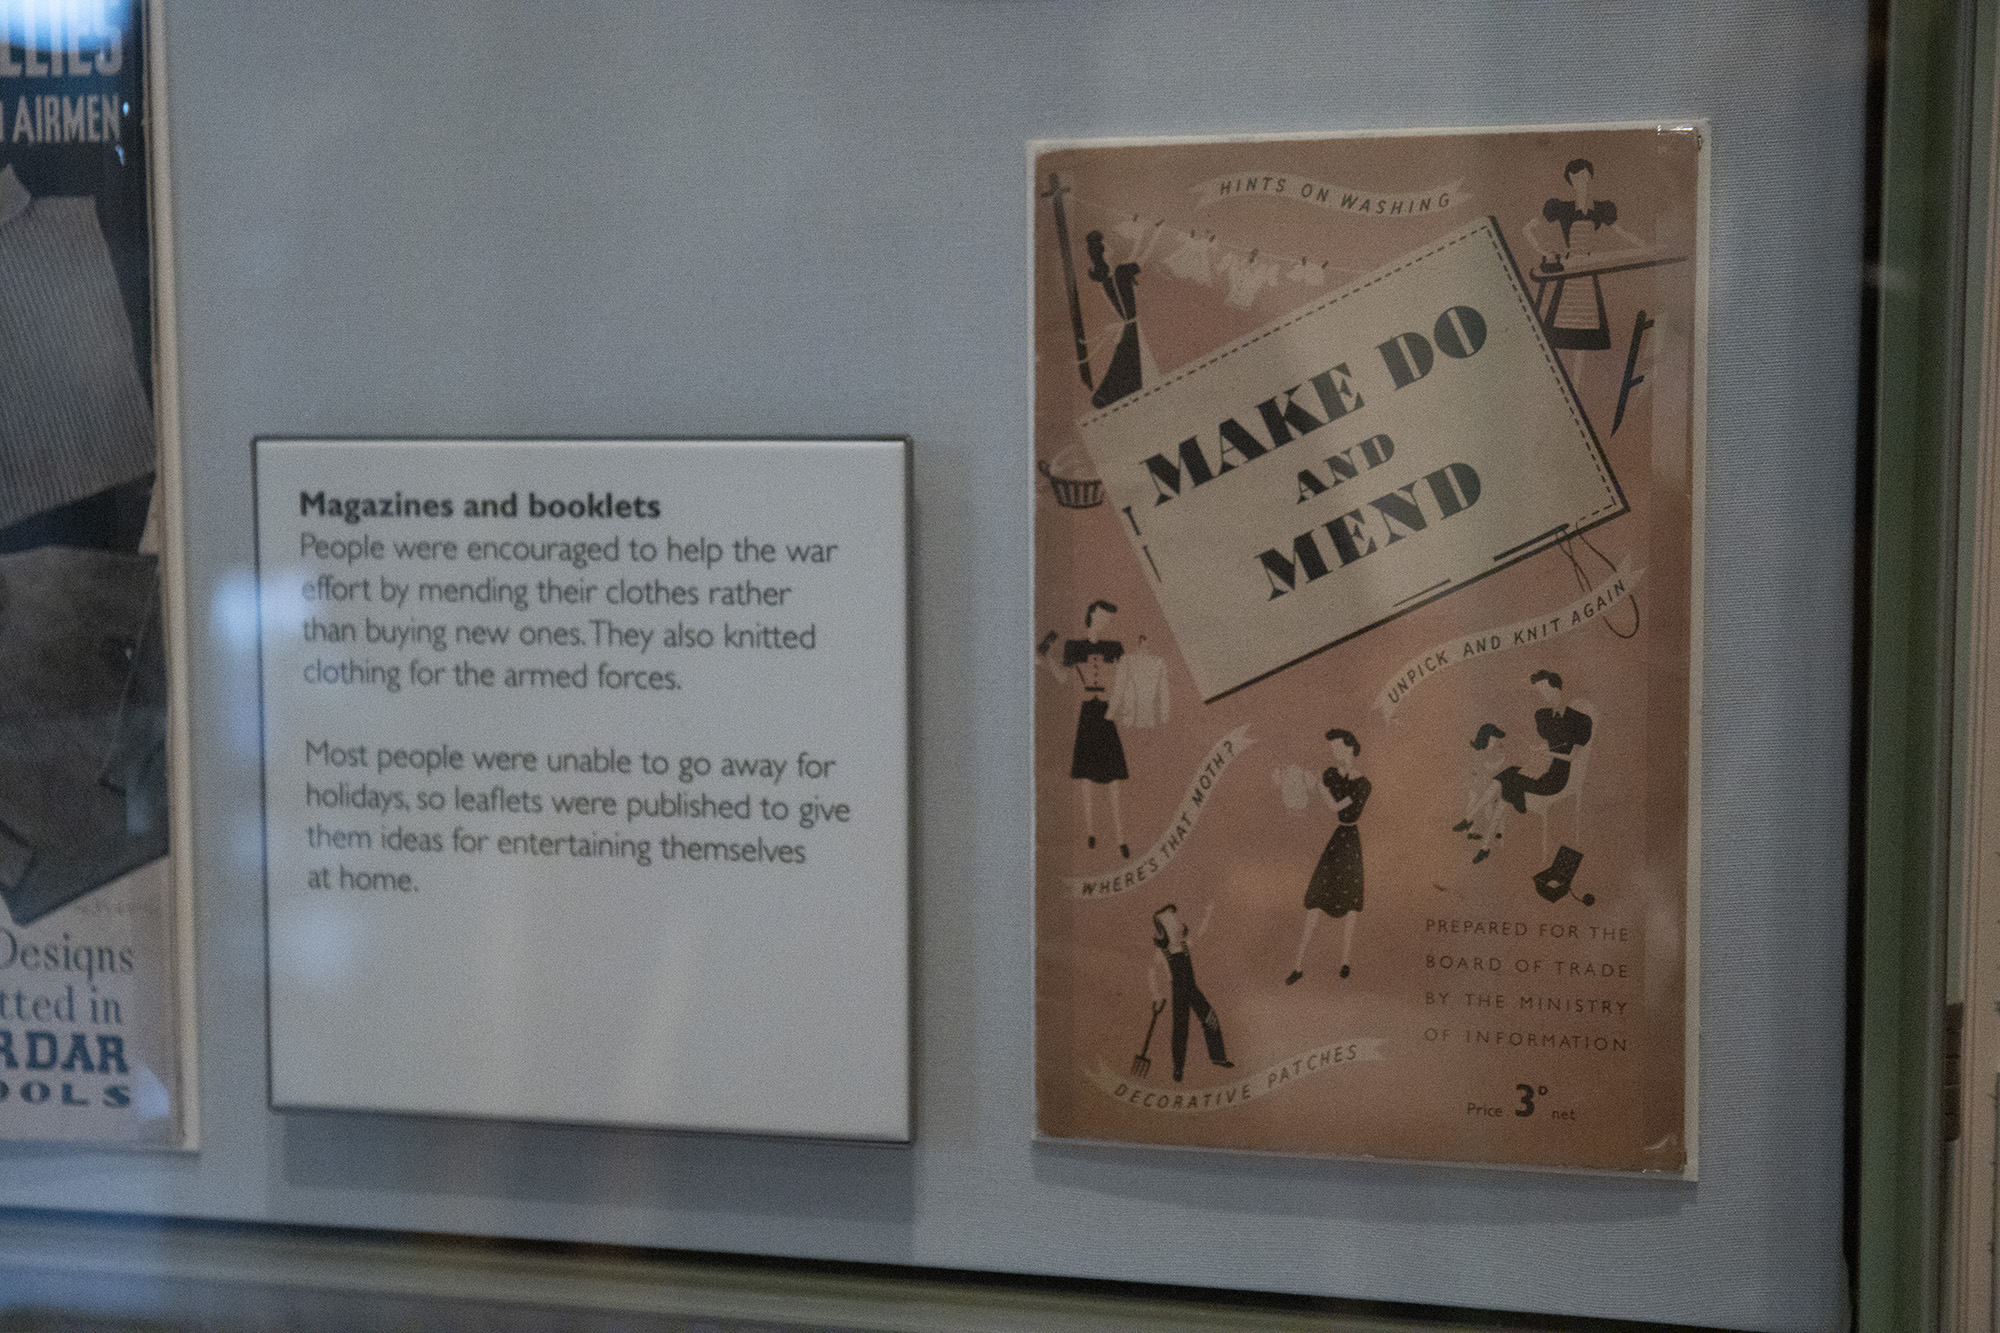 A photo of a Make Do and Mend leaflet on display next to an info panel on display in the Herbert's history gallery